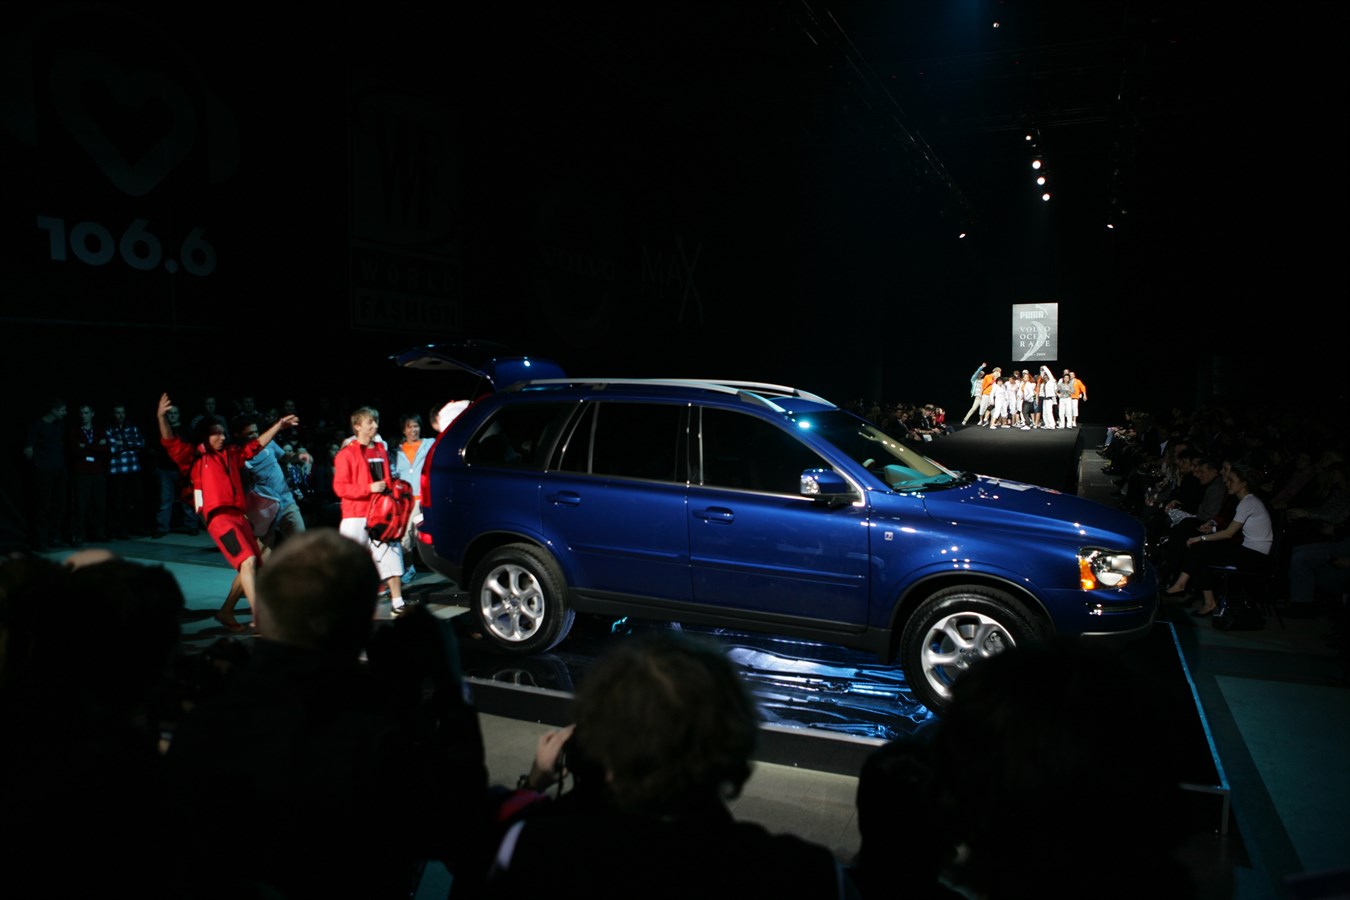 The Moscow spring fashion week 2008, the XC90 Ocean Race Edition was unveiled for the first time in Russia